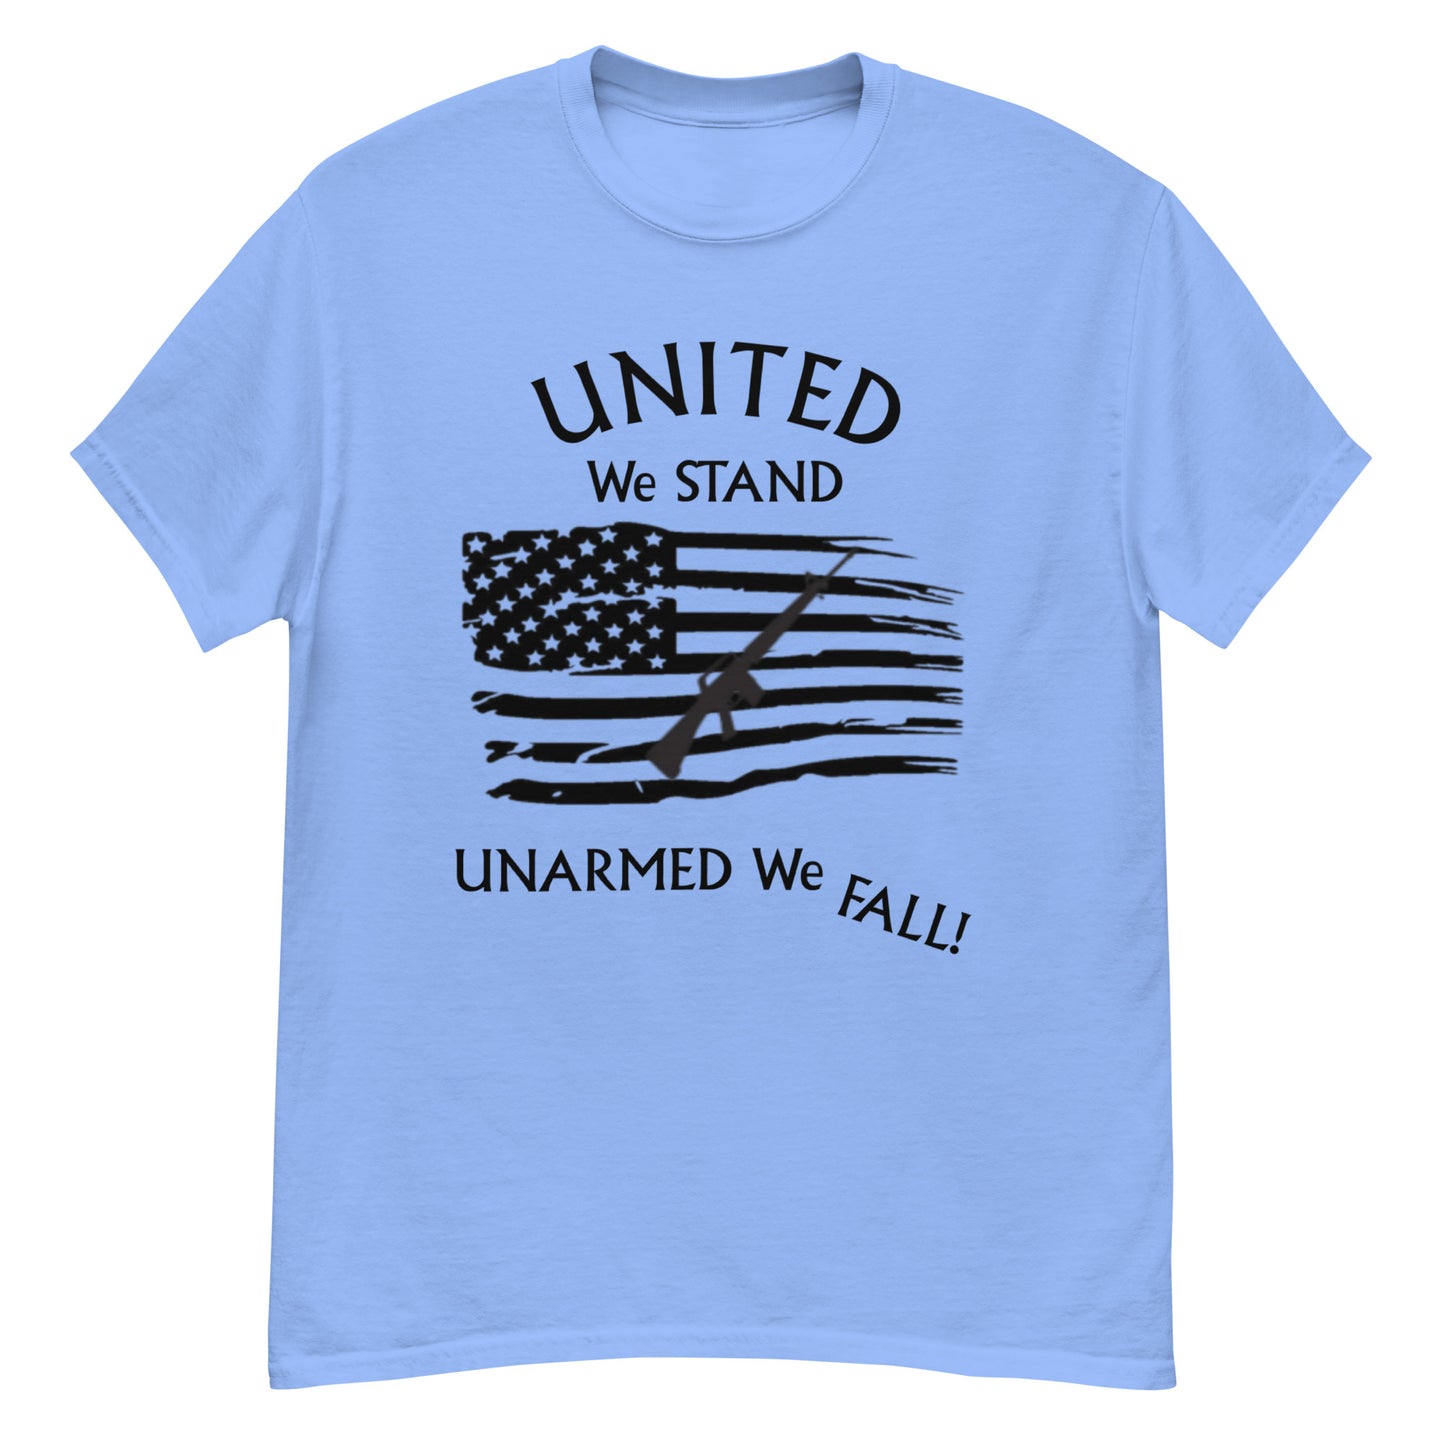 United We Stand, Unarmed we Fall - Unisex t-shirt